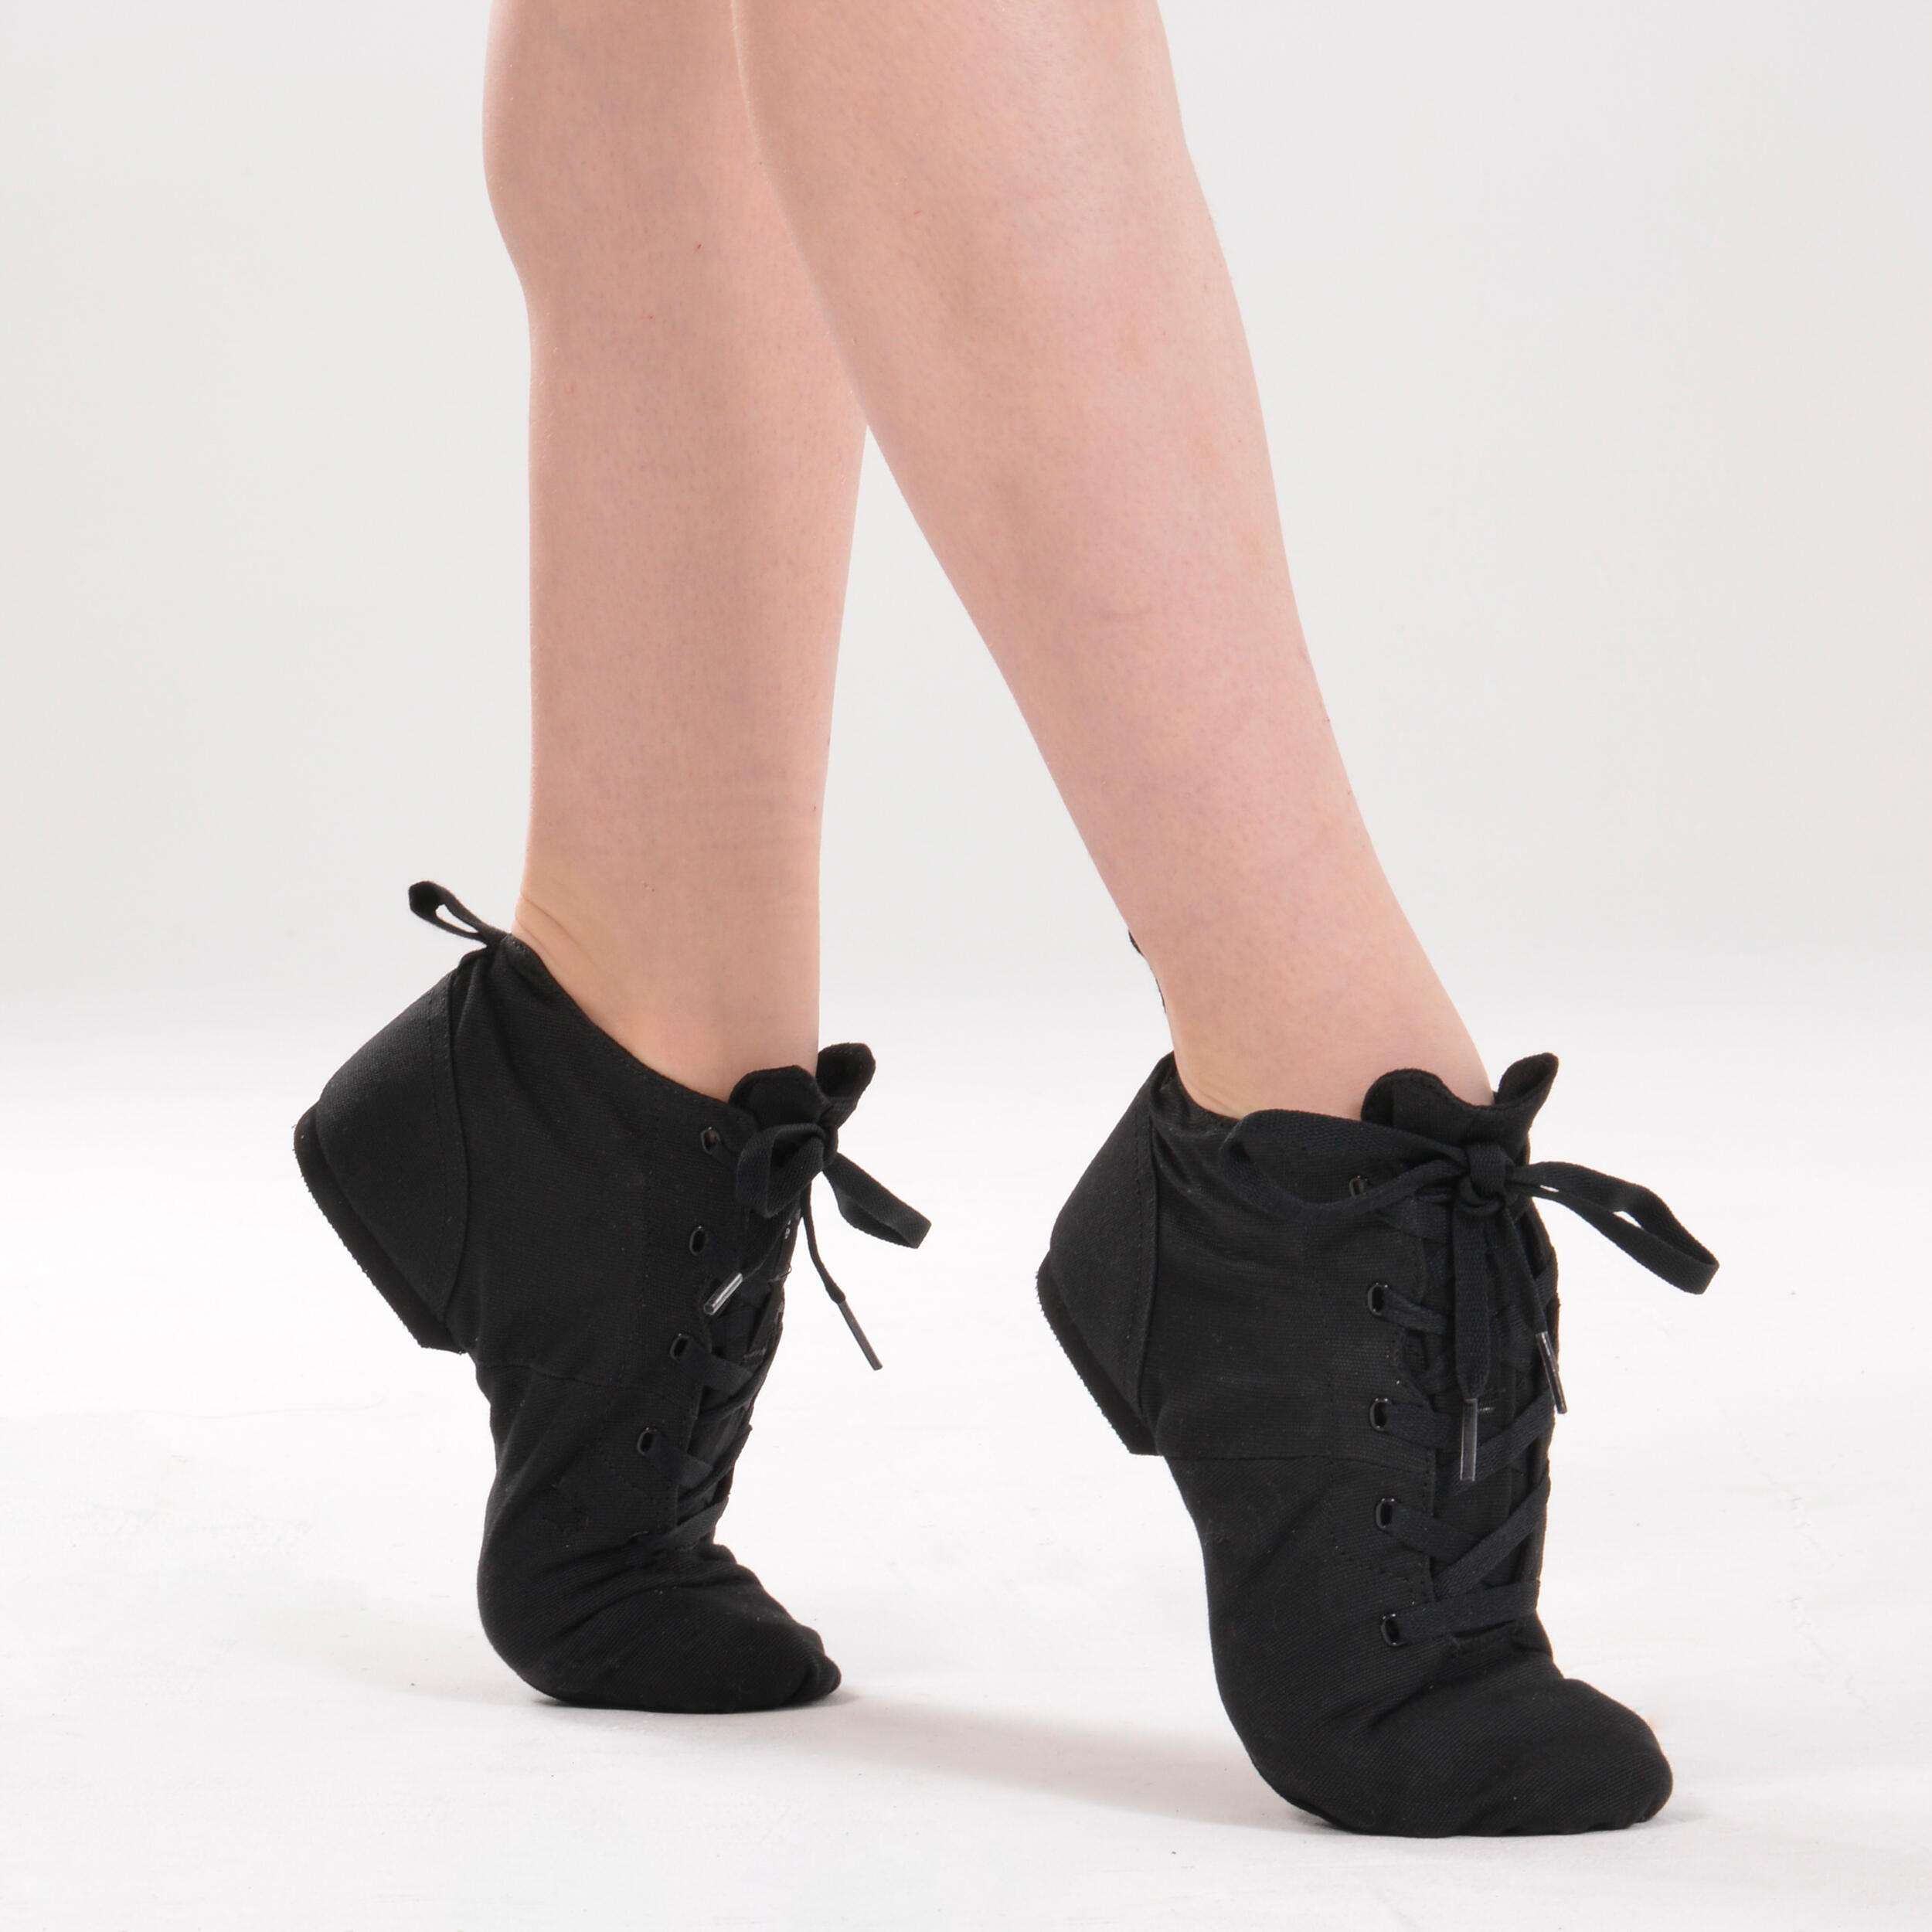 STAREVER Canvas Modern Jazz Dance Ankle Boots - Slippers - Black